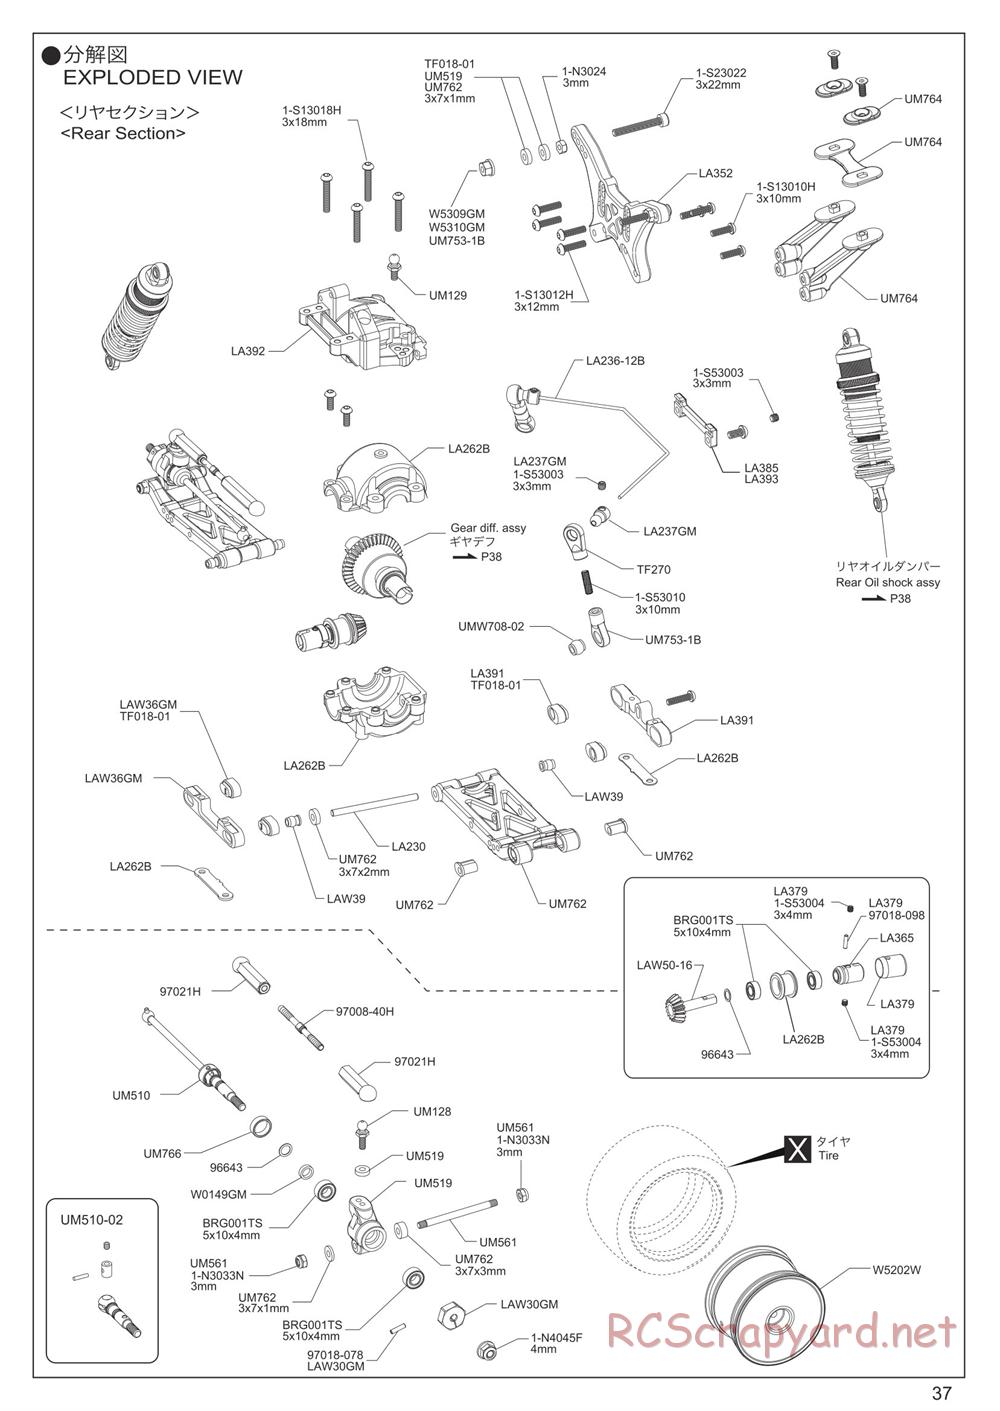 Kyosho - Lazer ZX7 - Exploded Views - Page 3